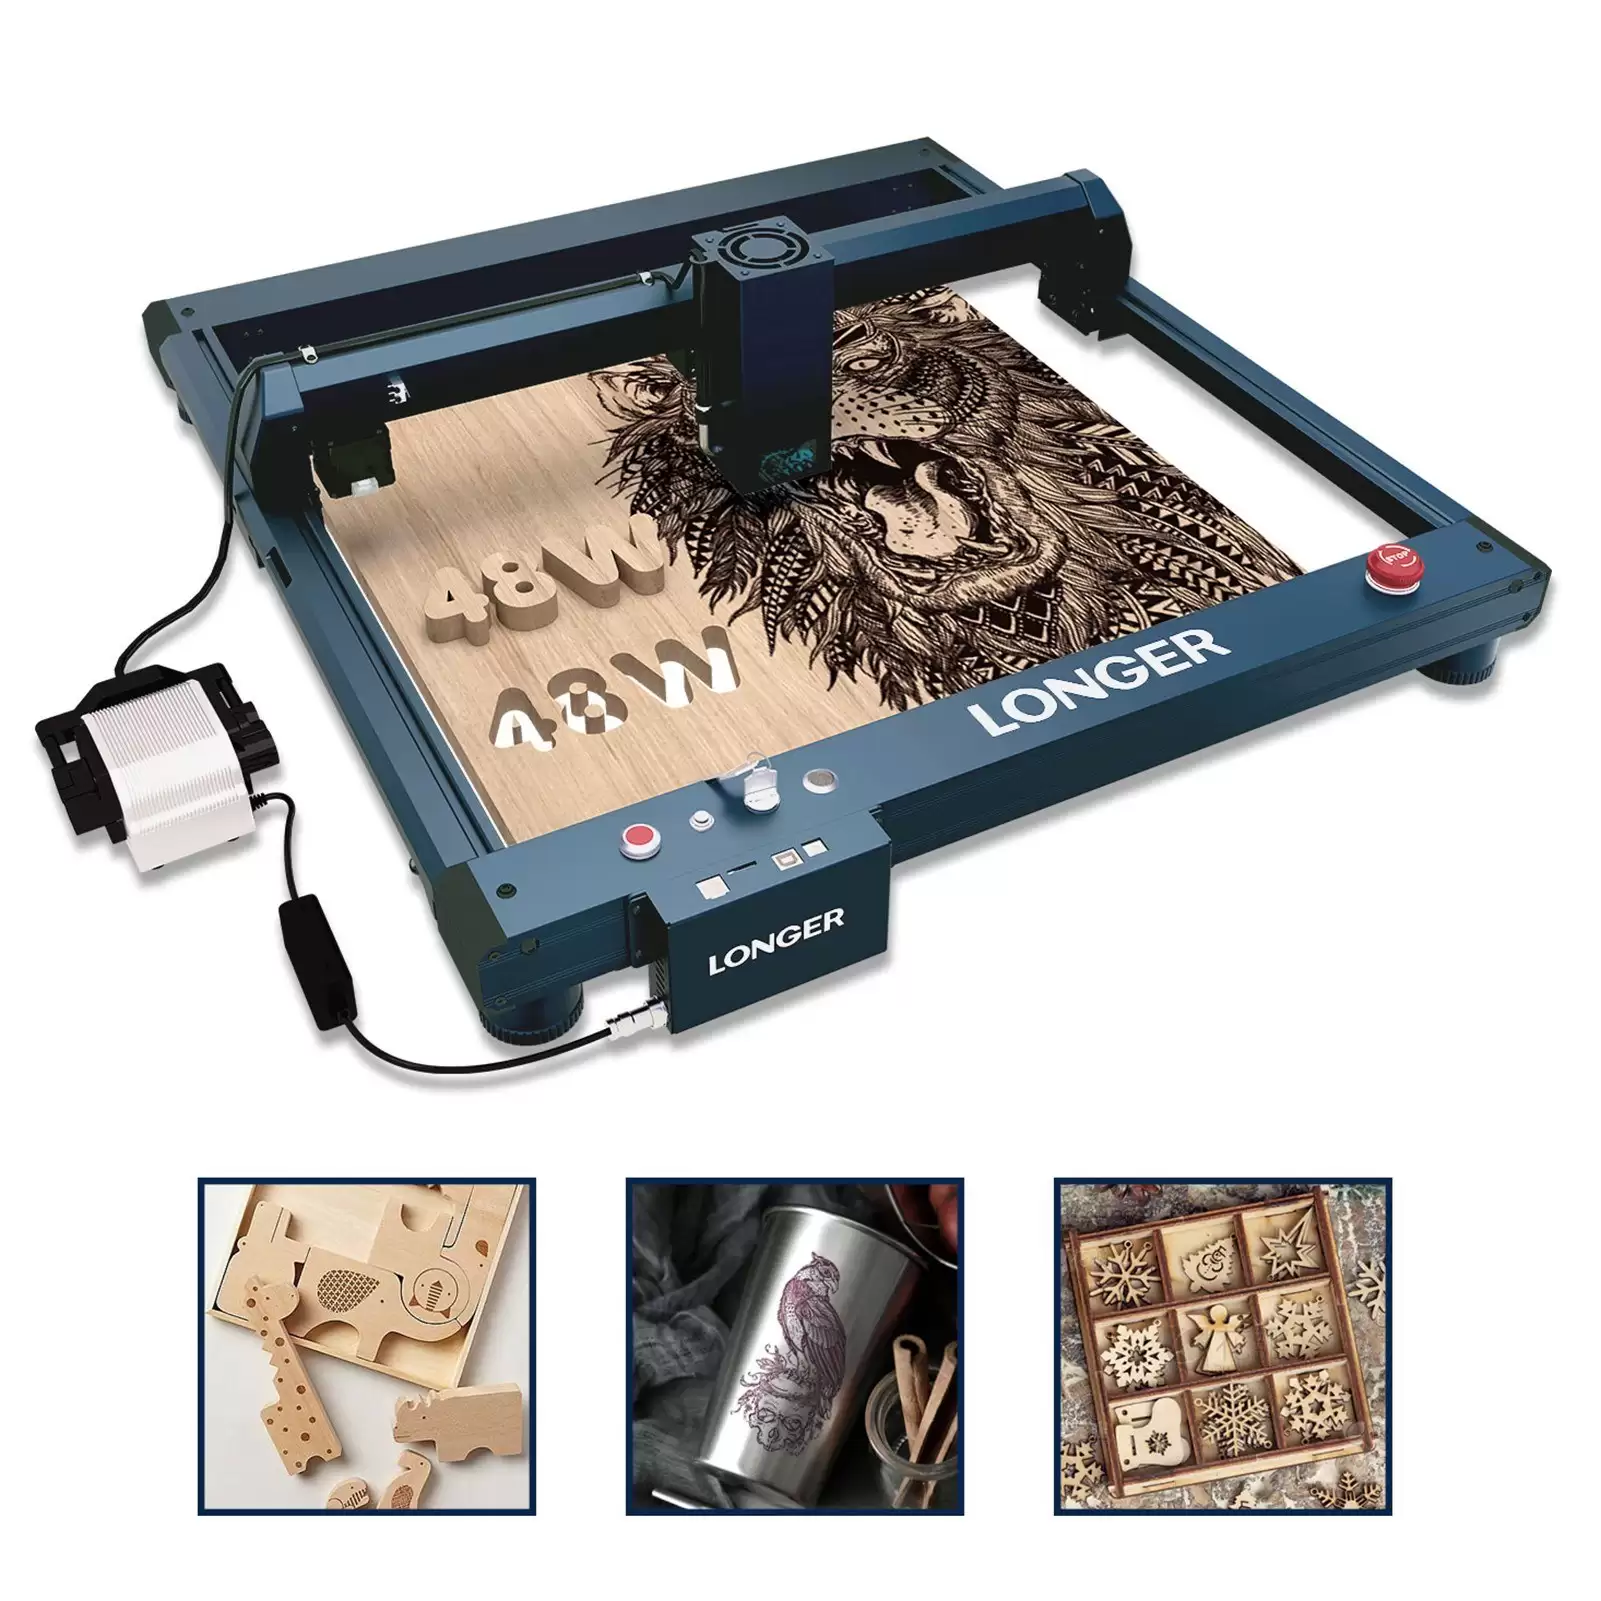 Order In Just €939 Longer Laser B1 40w Laser Engraver + Free Shipping With This Discount Coupon At Cafago